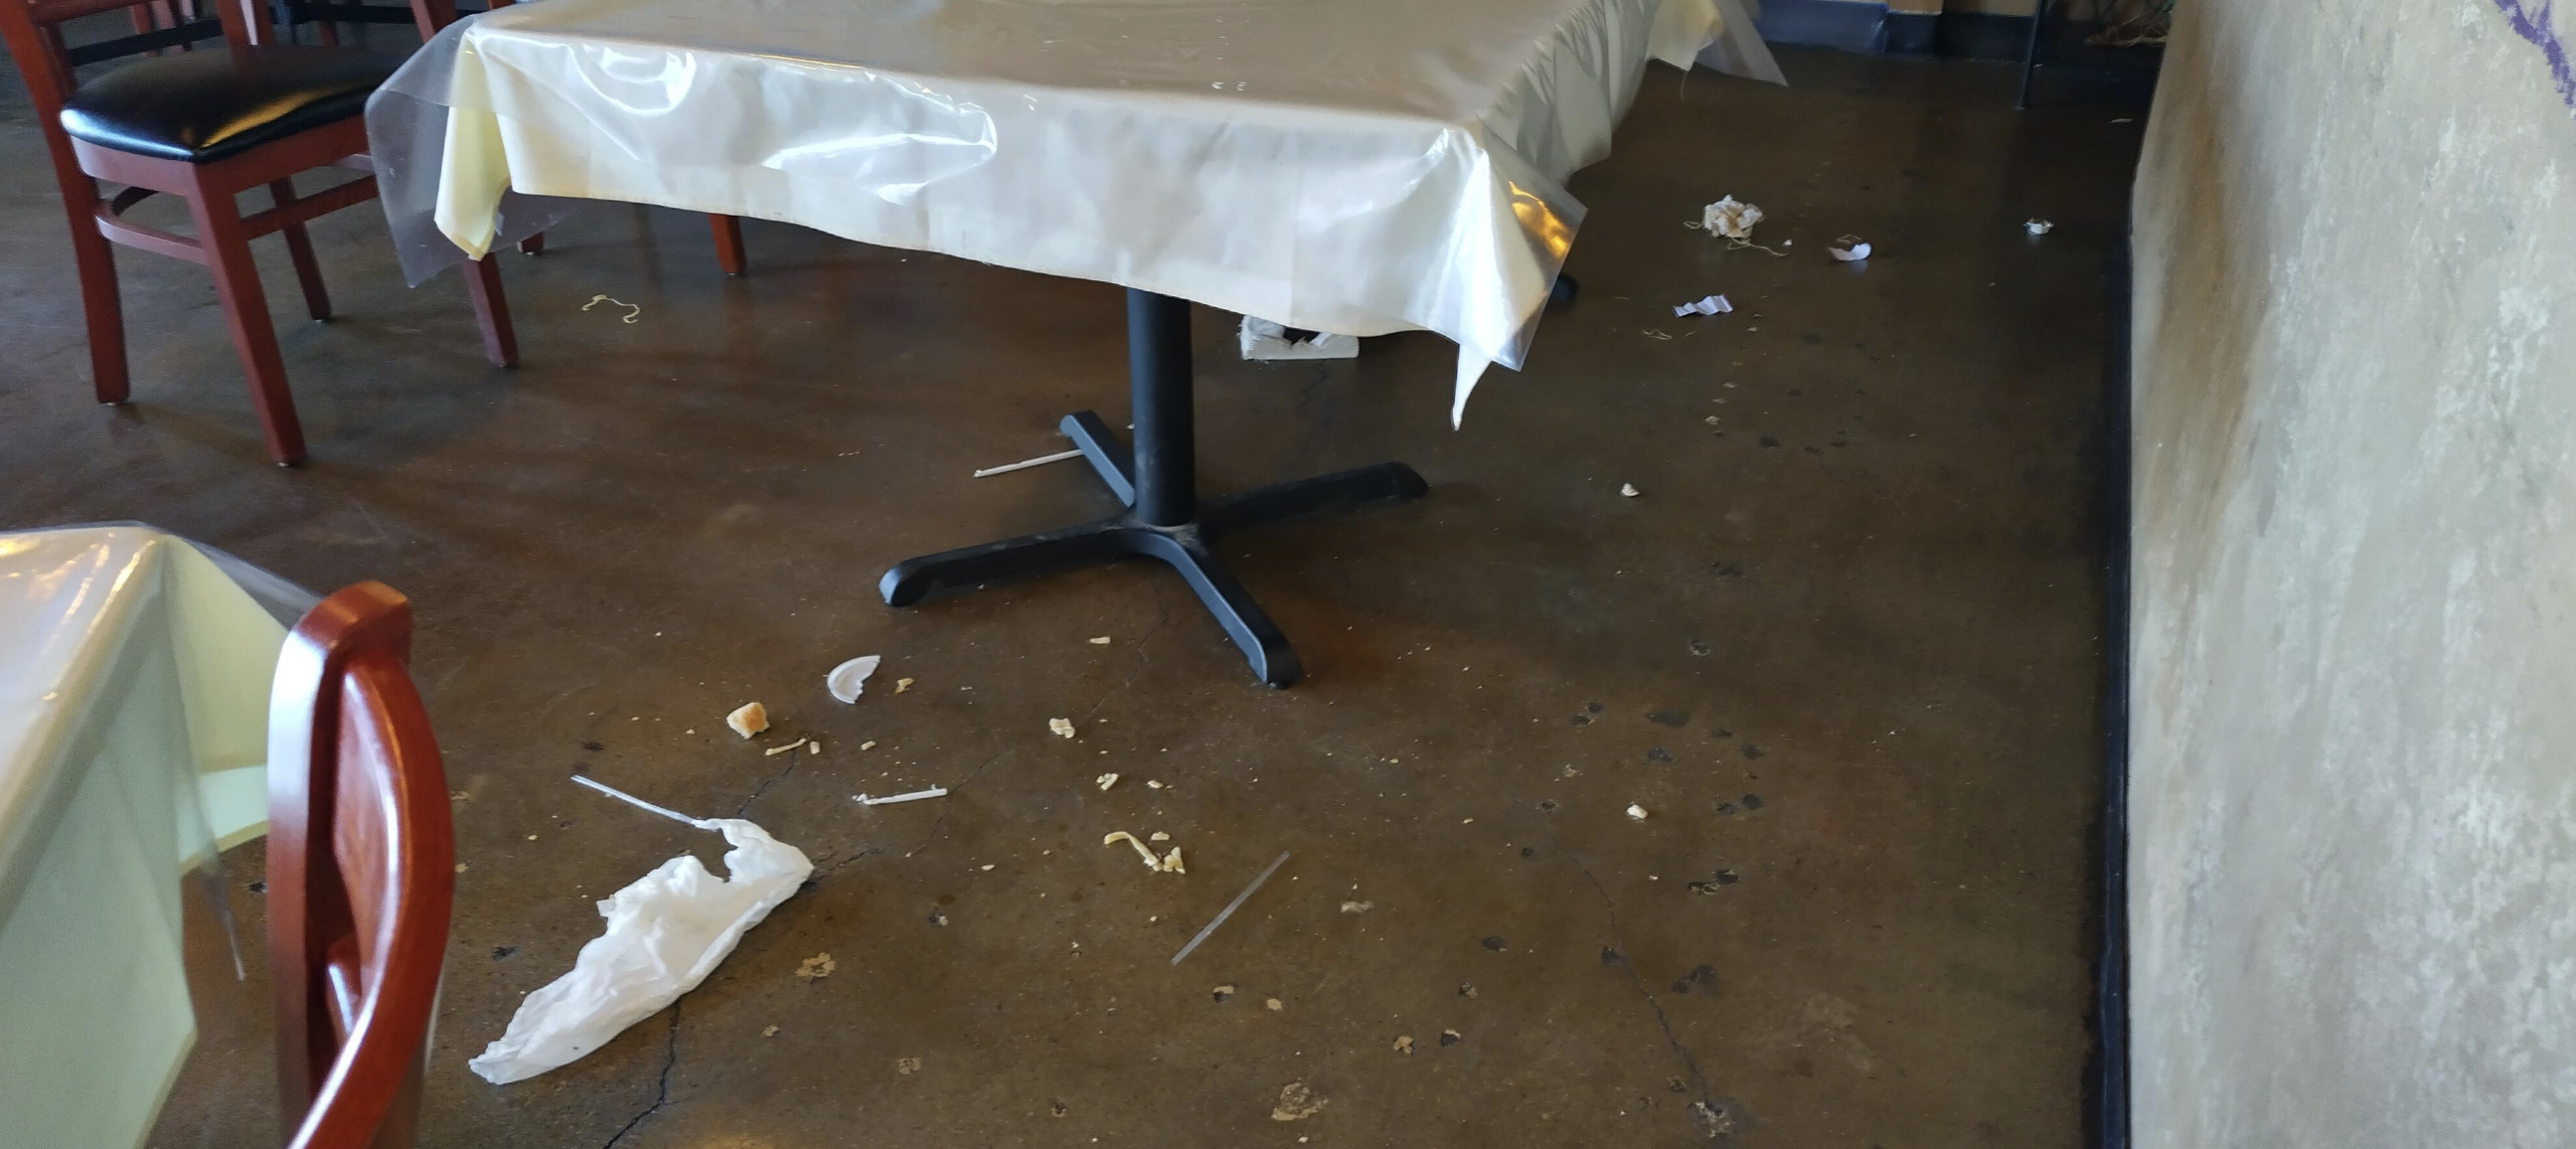 A mess on the floor in a restaurant